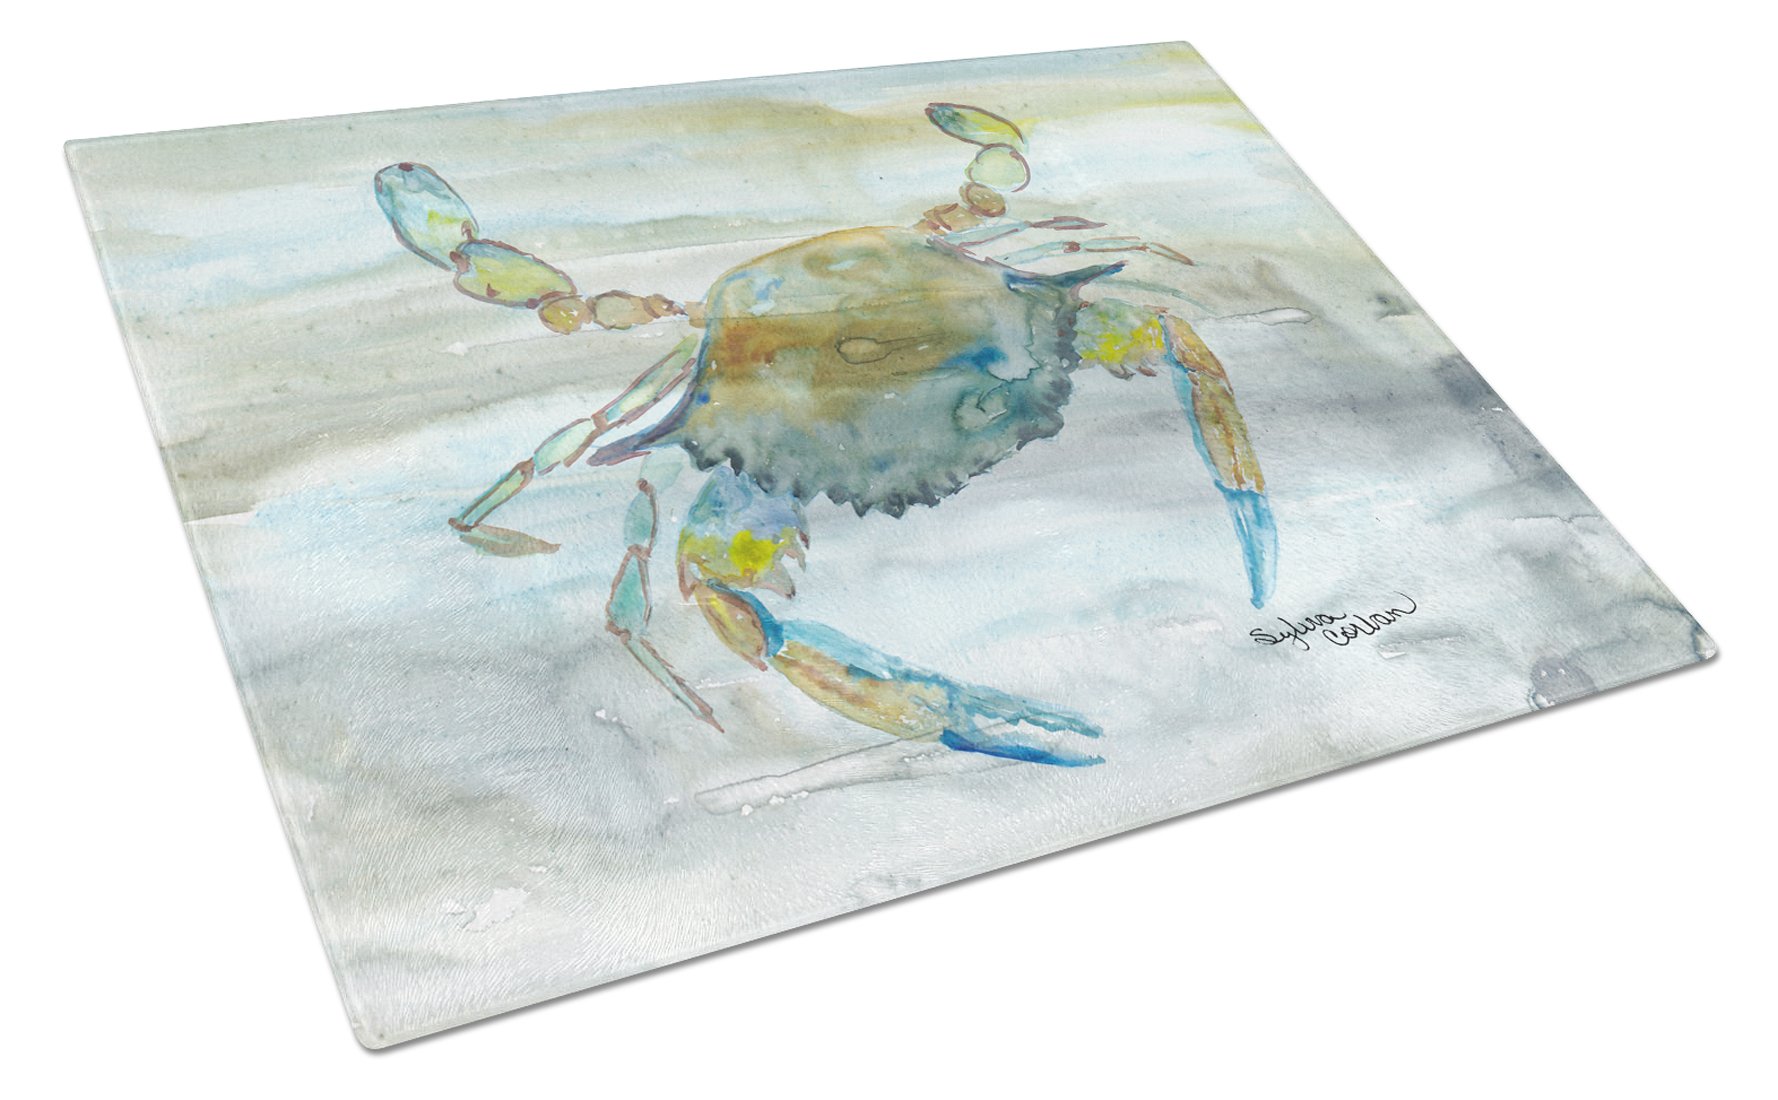 Blue Crab #2 Watercolor Glass Cutting Board Large SC2004LCB by Caroline's Treasures